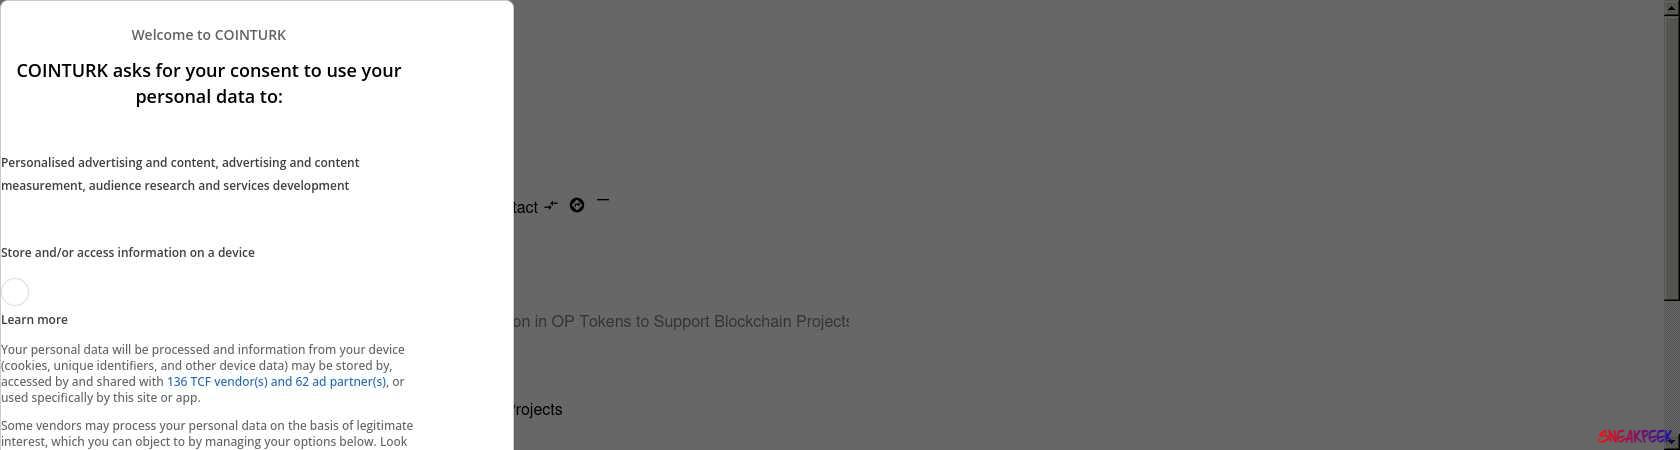 Read the full Article:  ⭲ Optimism Allocates $3.3 Billion in OP Tokens to Support Blockchain Projects